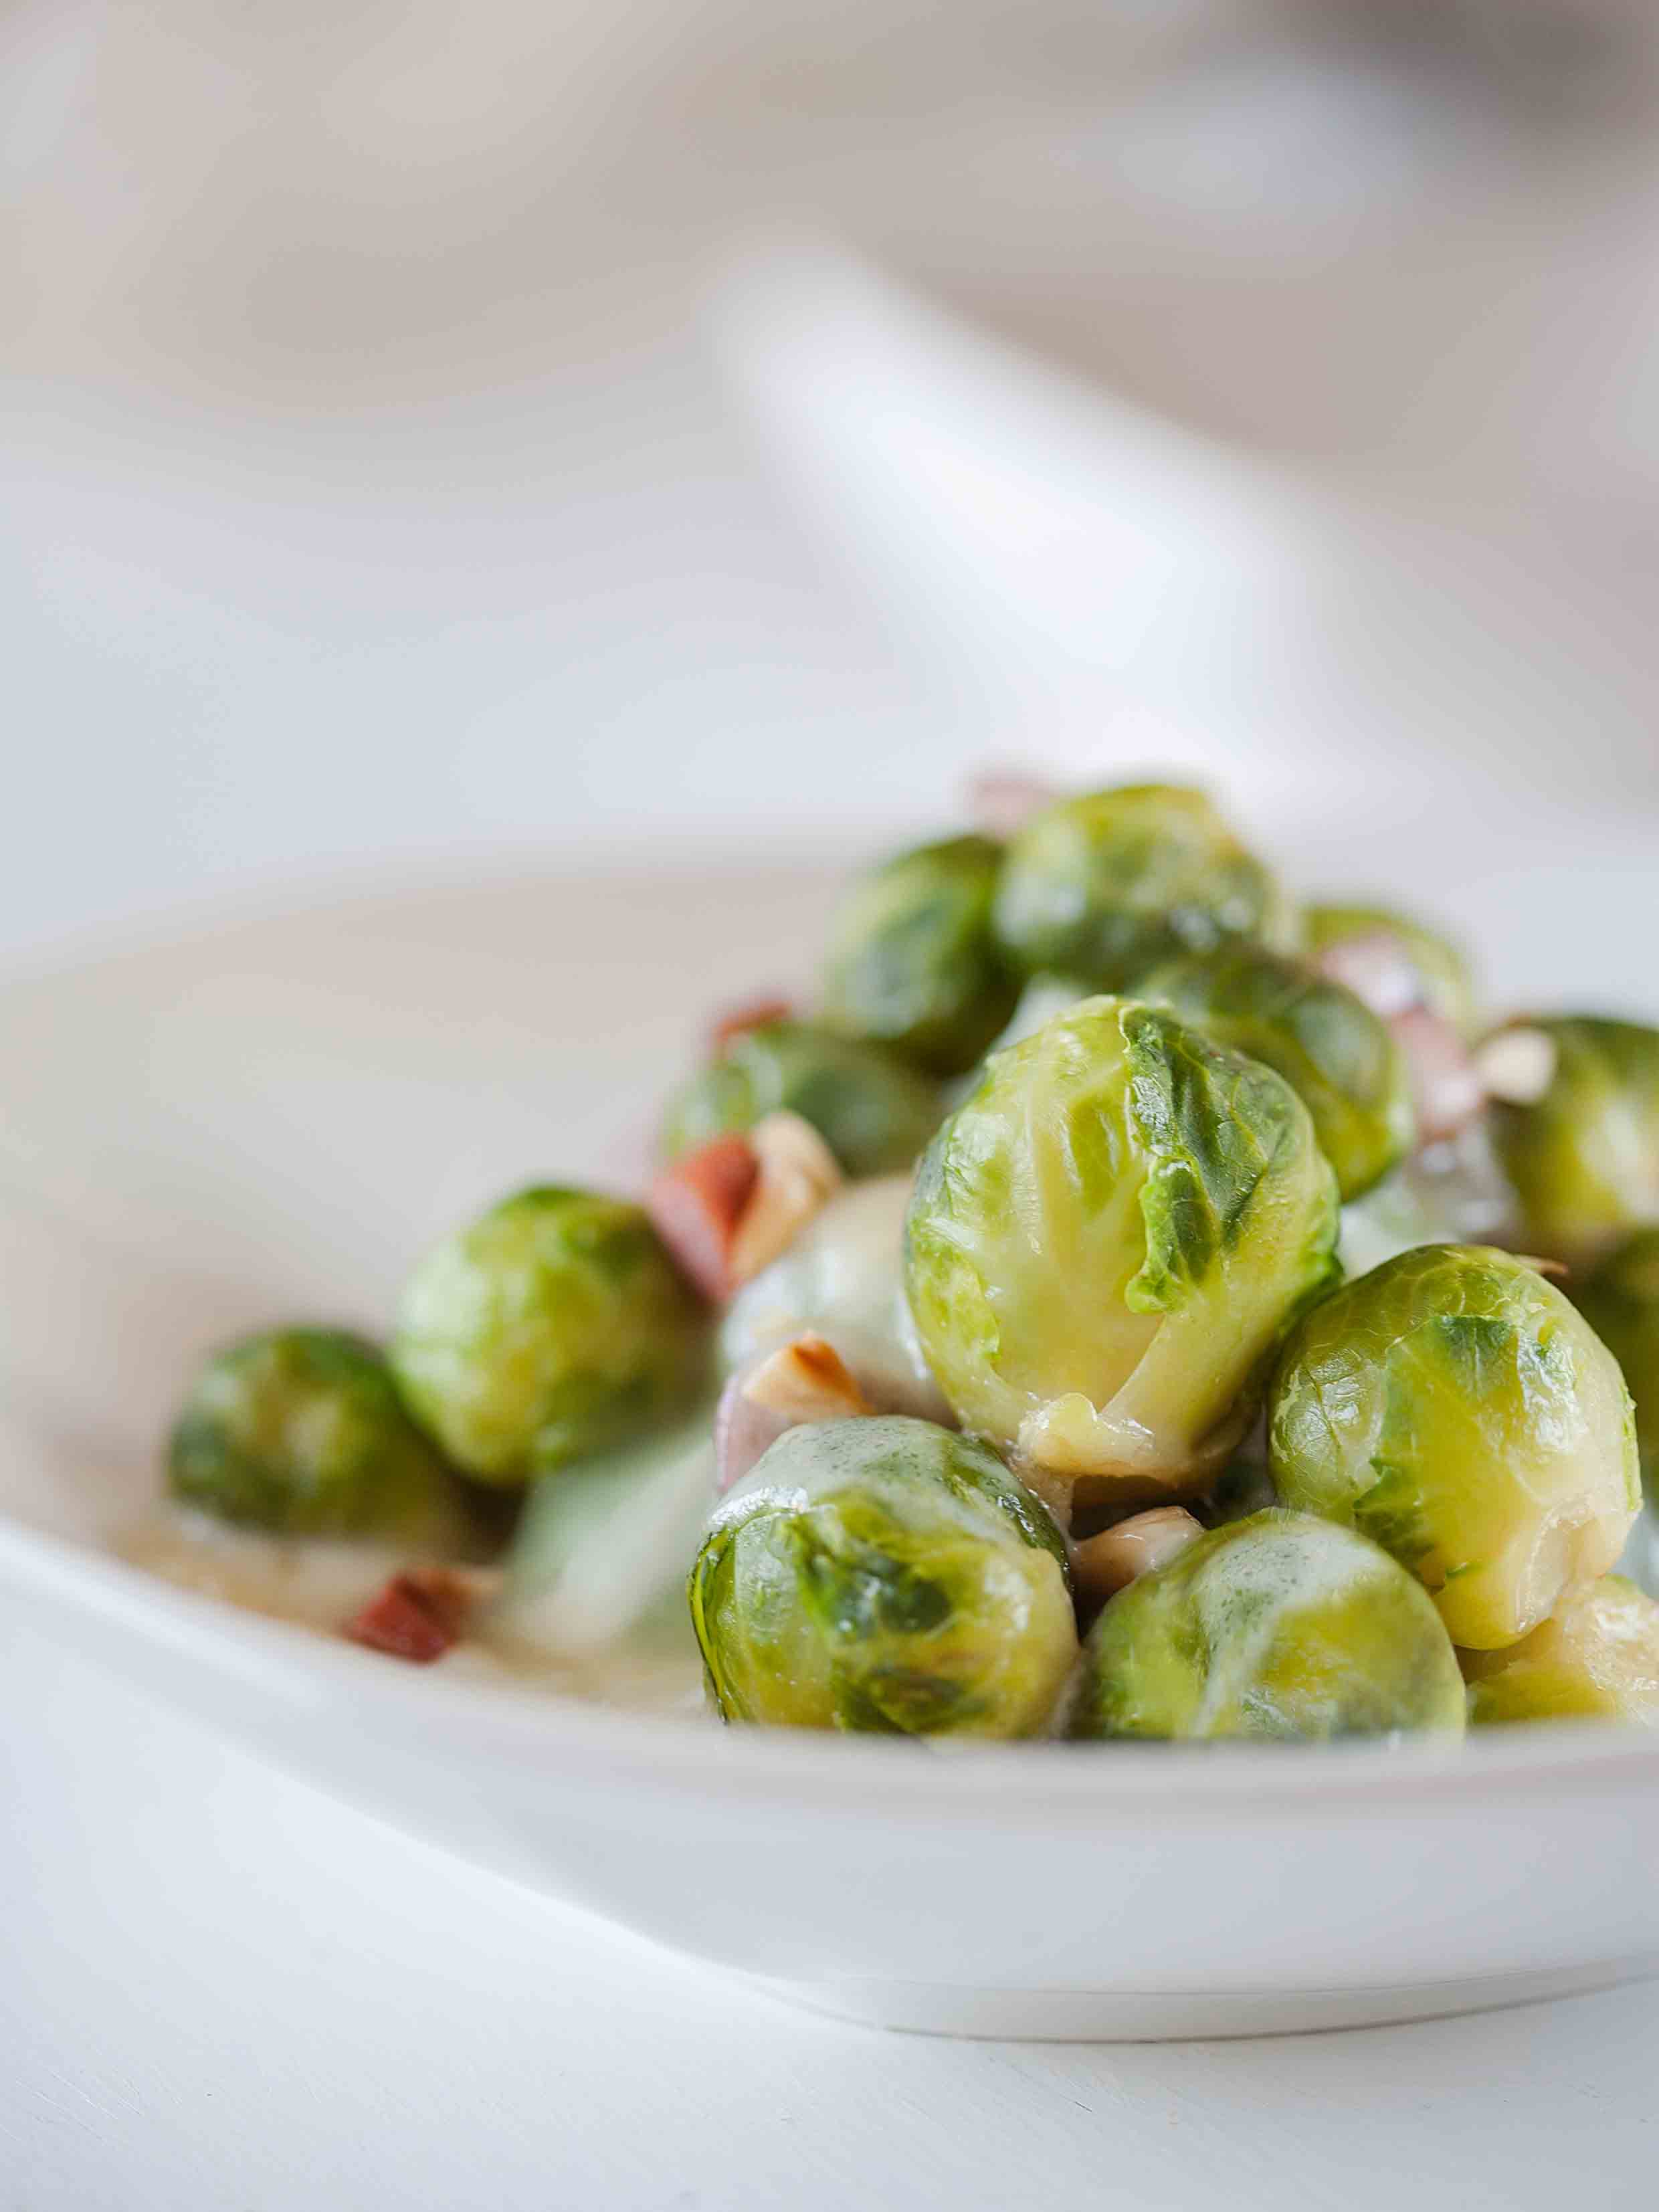 brussels-sprouts-sauteed-smoked-2.jpg